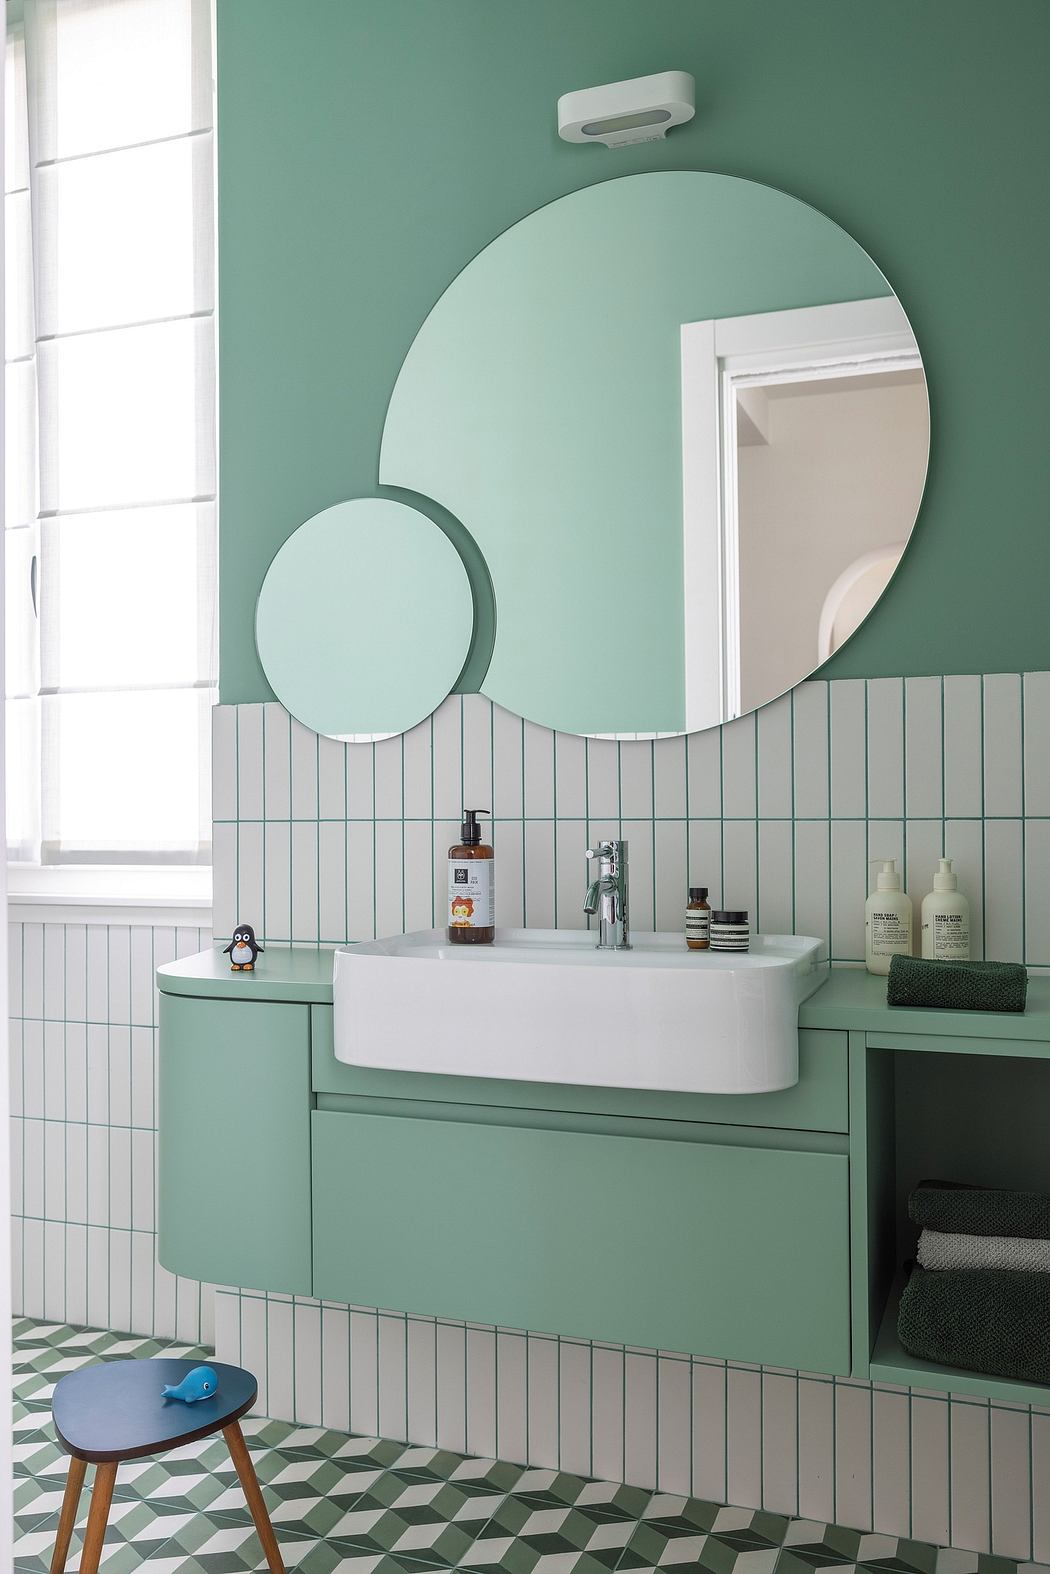 Stylish mint-green bathroom with round mirrors, tiled walls, and a modern vanity.